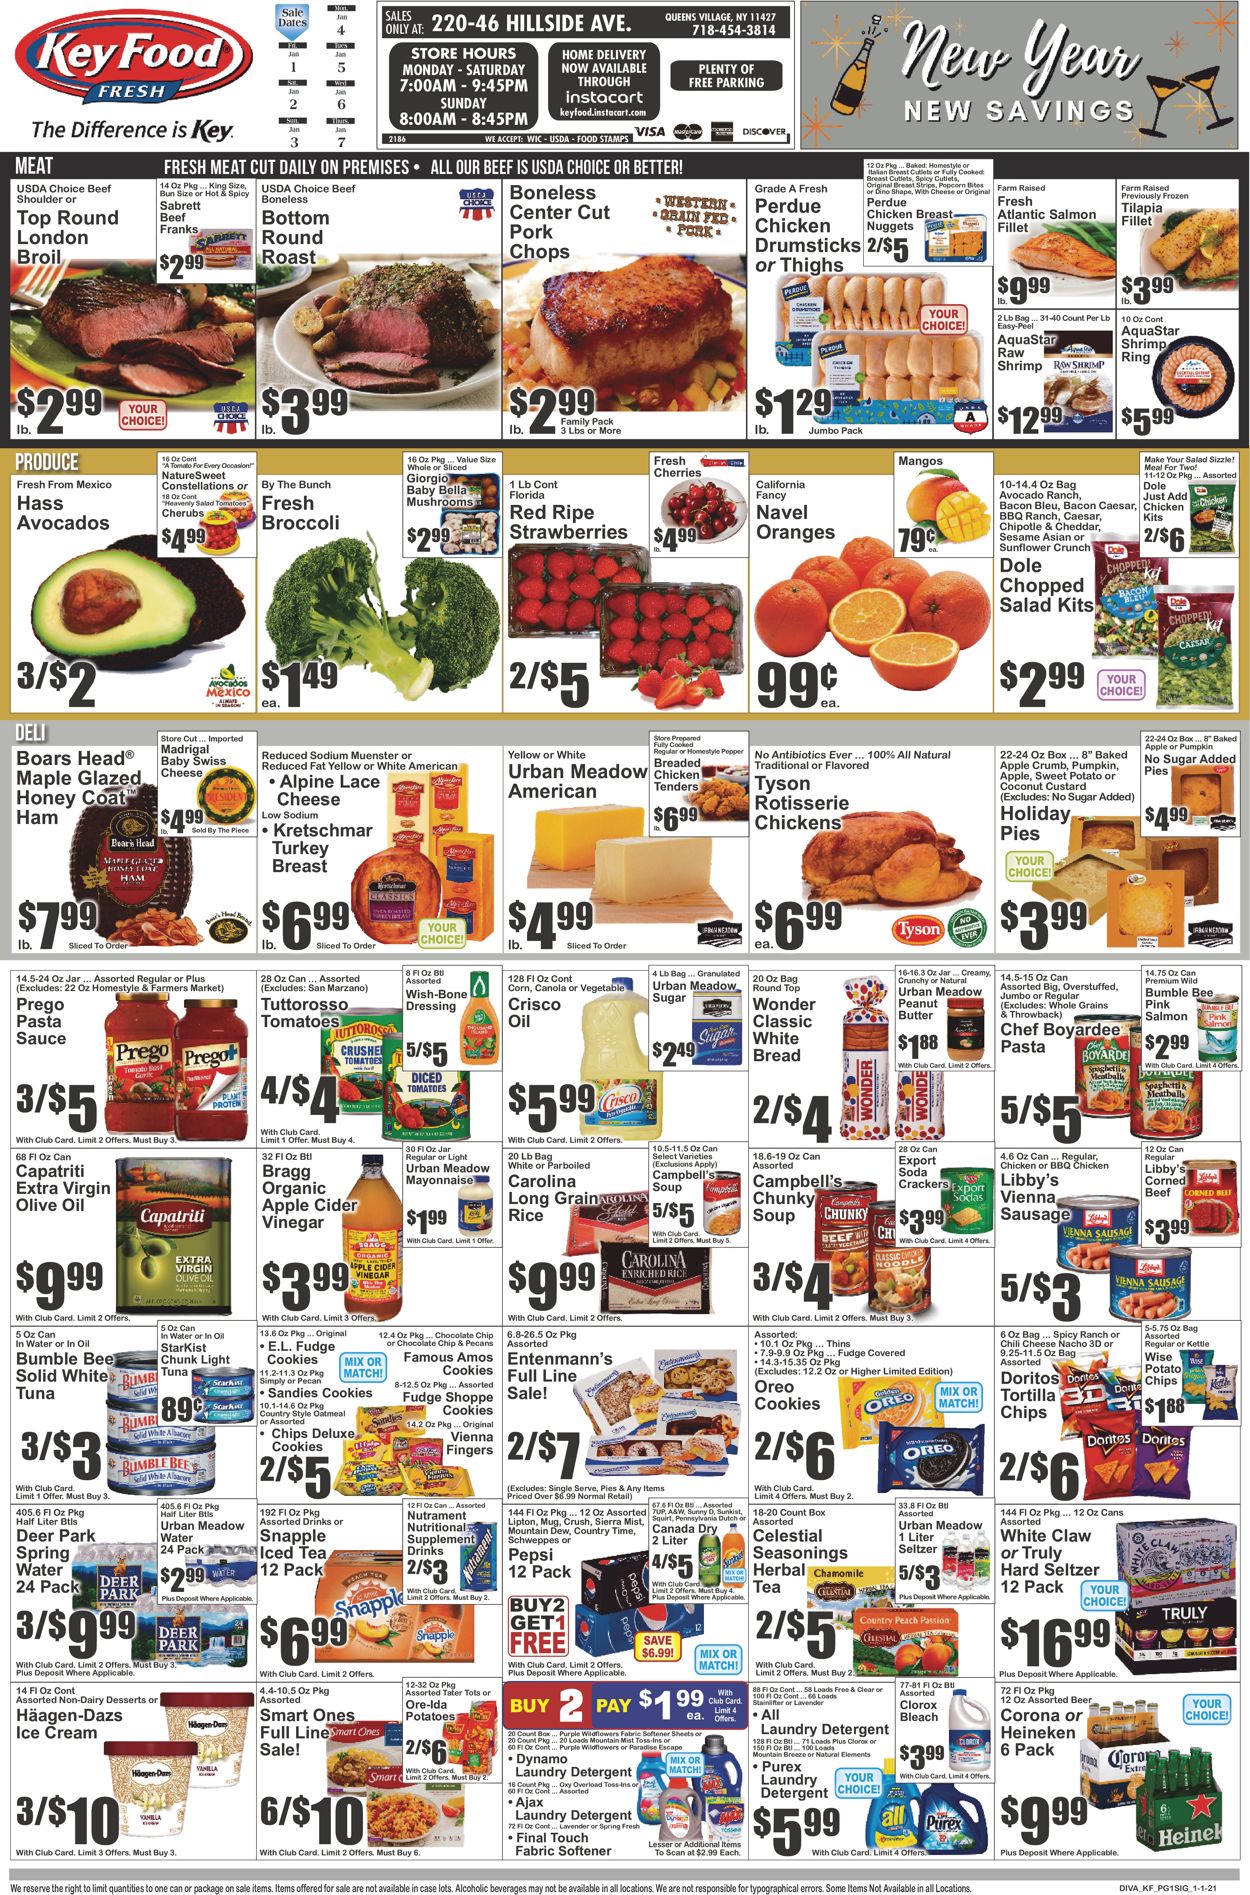 Key Food Current weekly ad 01/01 - 01/07/2021 - frequent-ads.com